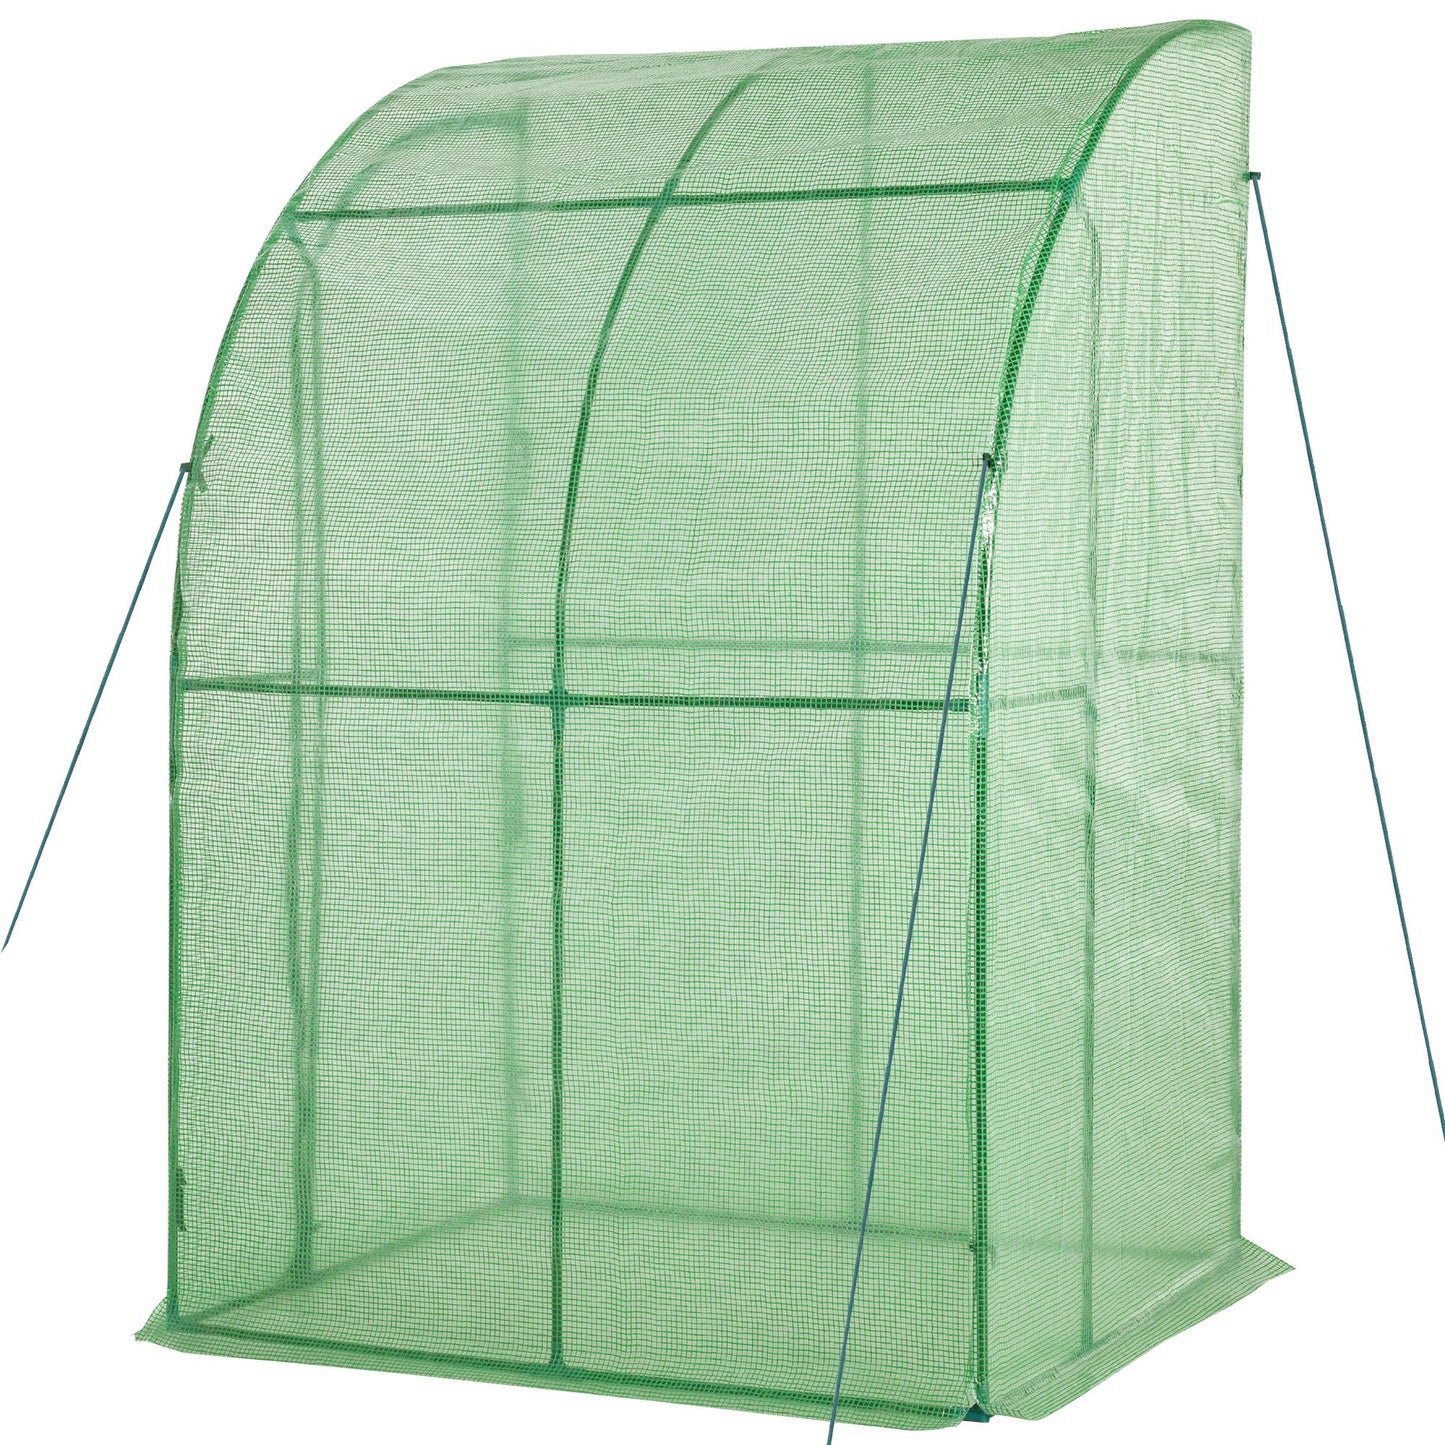 Outsunny Outdoor Medium Plant Green House w/Zippered Doors Strong PE Cover 143x118x212cm